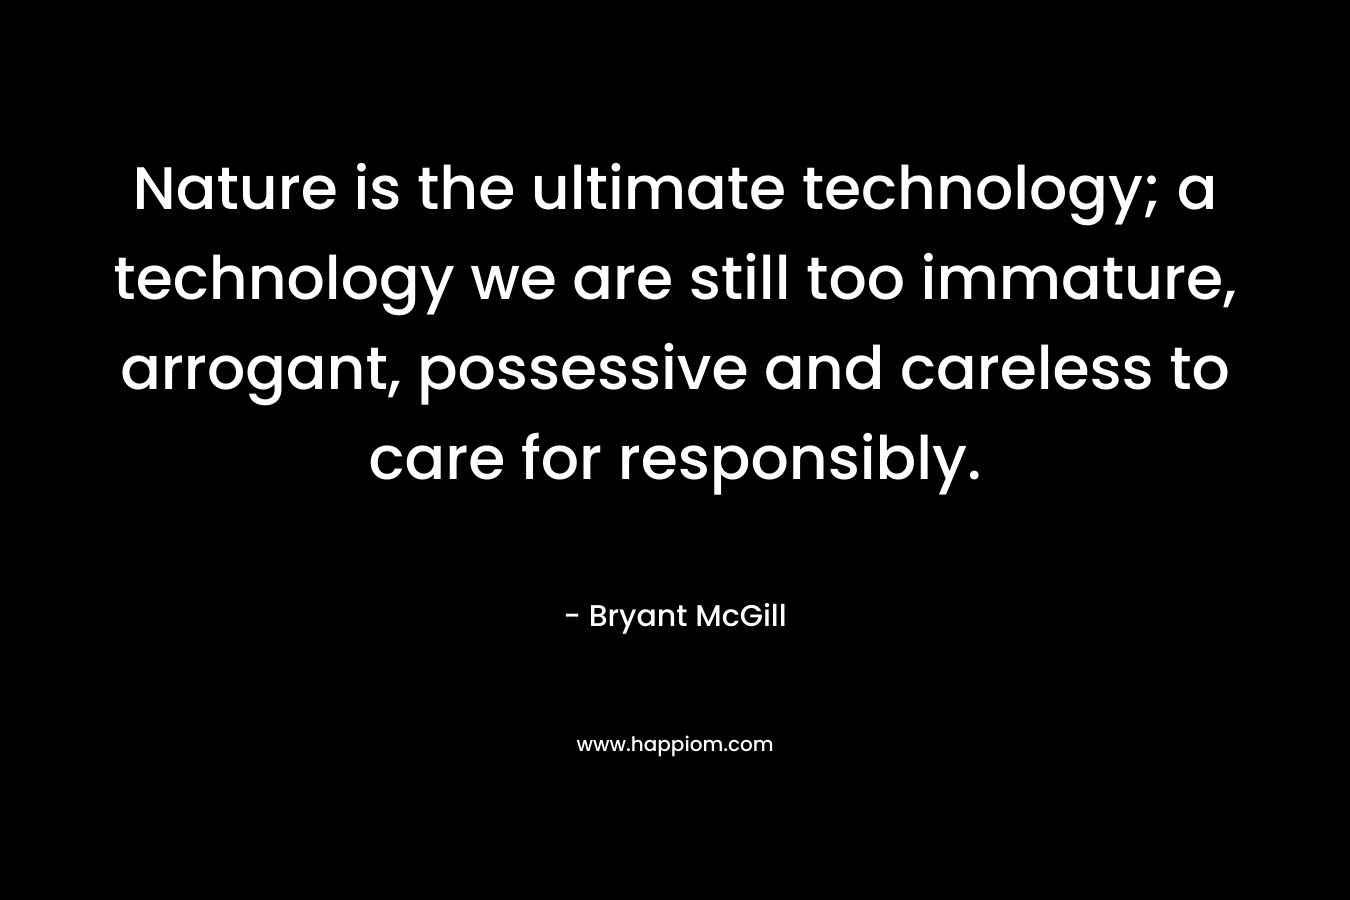 Nature is the ultimate technology; a technology we are still too immature, arrogant, possessive and careless to care for responsibly.